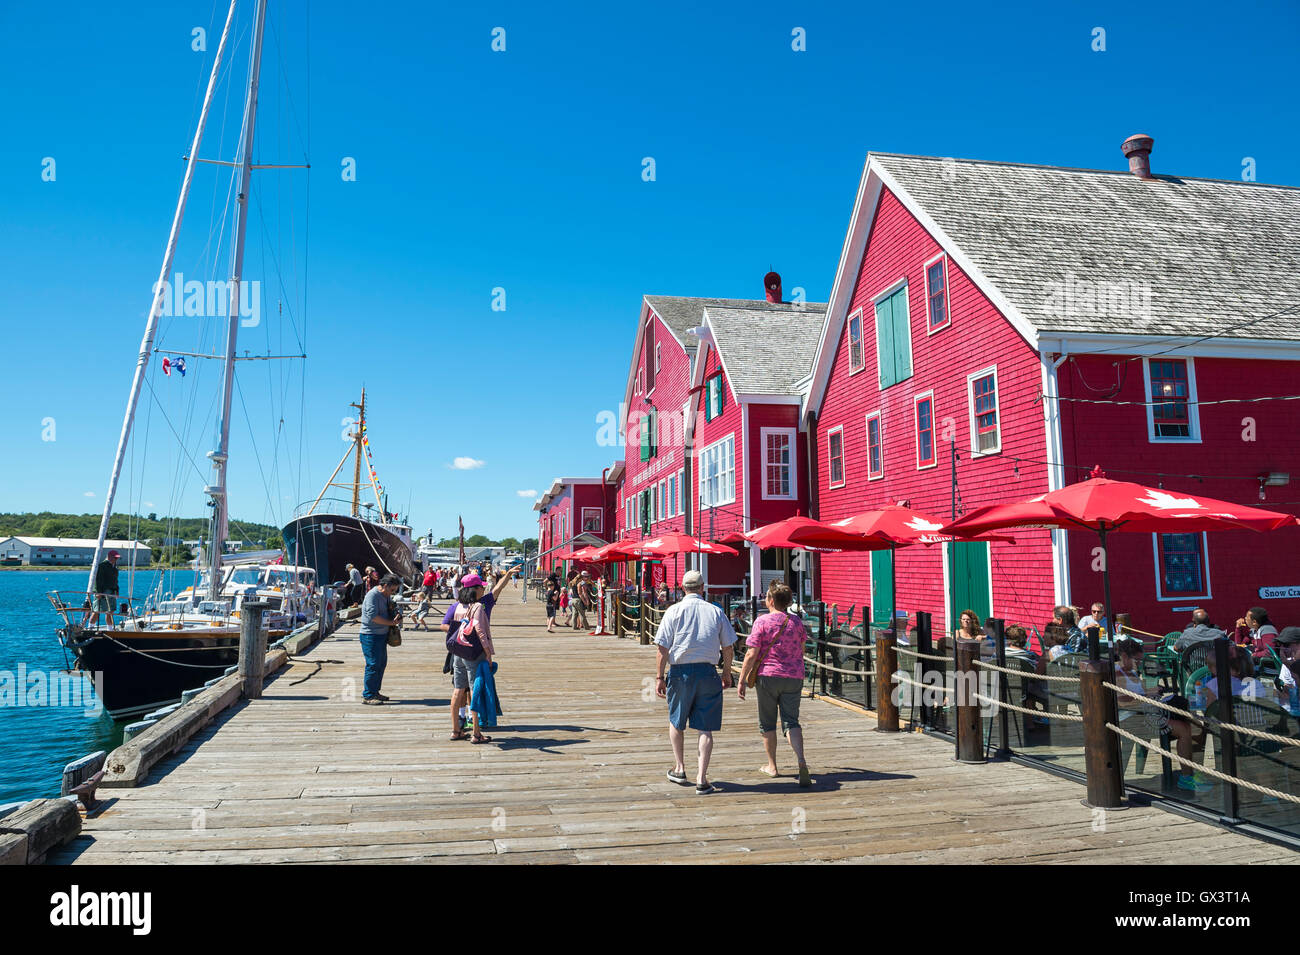 LUNENBURG, NOVA SCOTIA - AUGUST 23, 2016: Tourists stroll along the rustic wooden boardwalk in front of the classic architecture Stock Photo